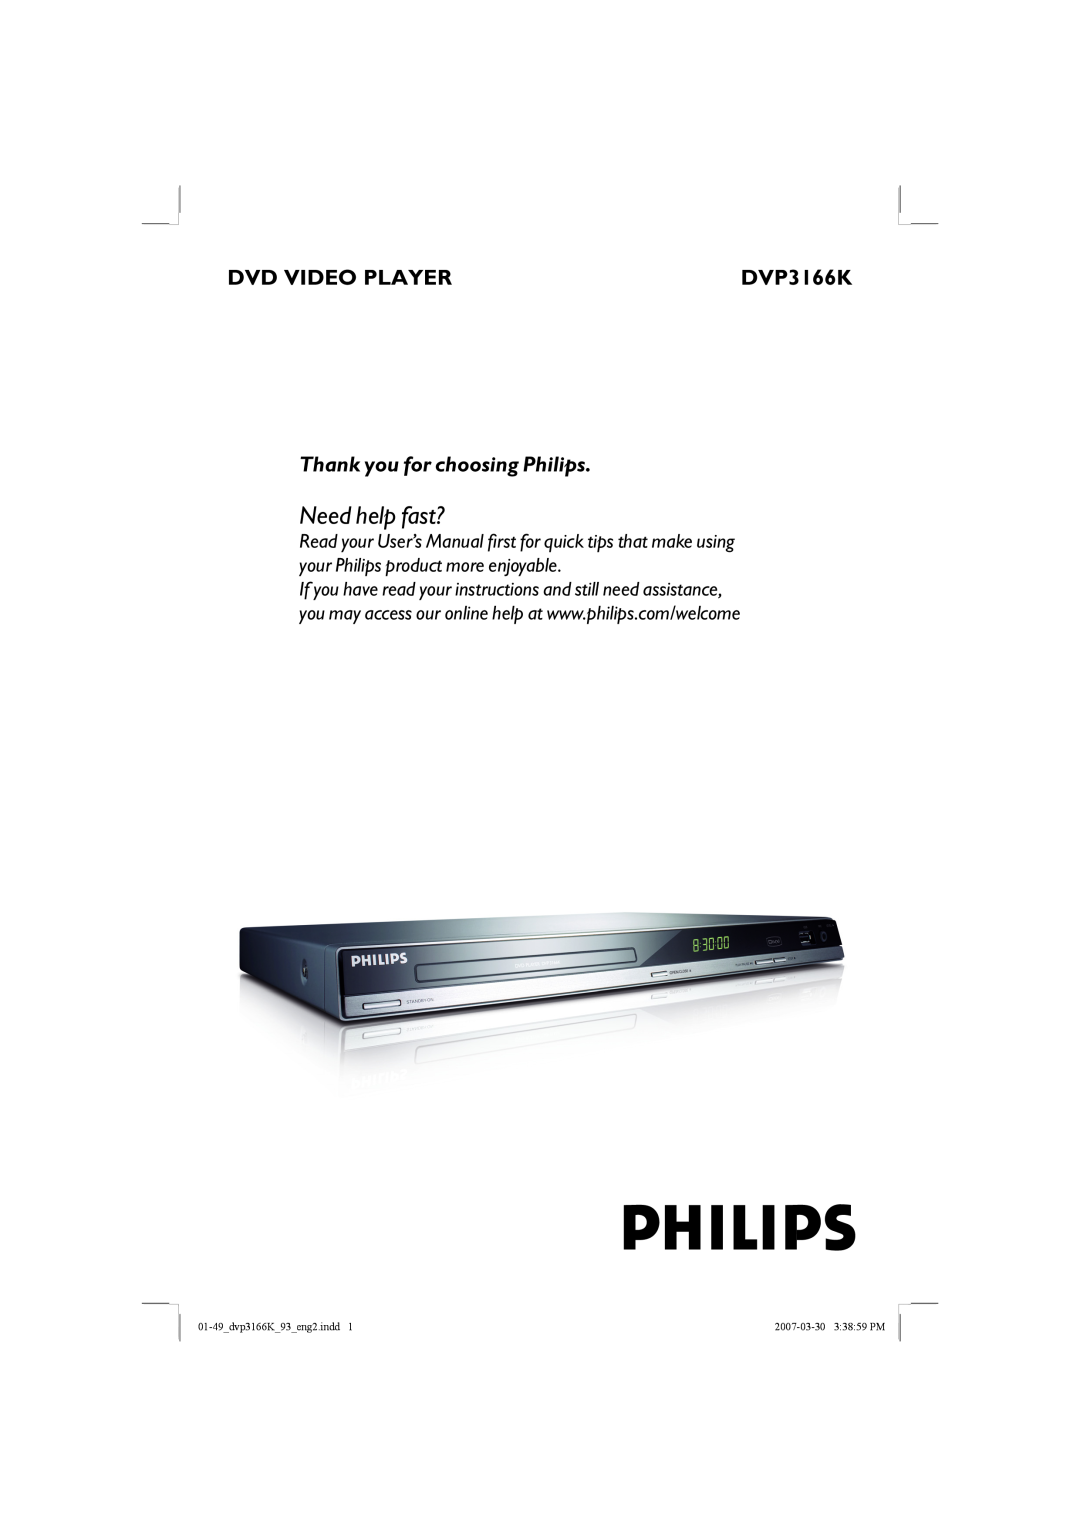 Philips DVP3166K/93 user manual Dvd Video Player, Need help fast?, Thank you for choosing Philips 